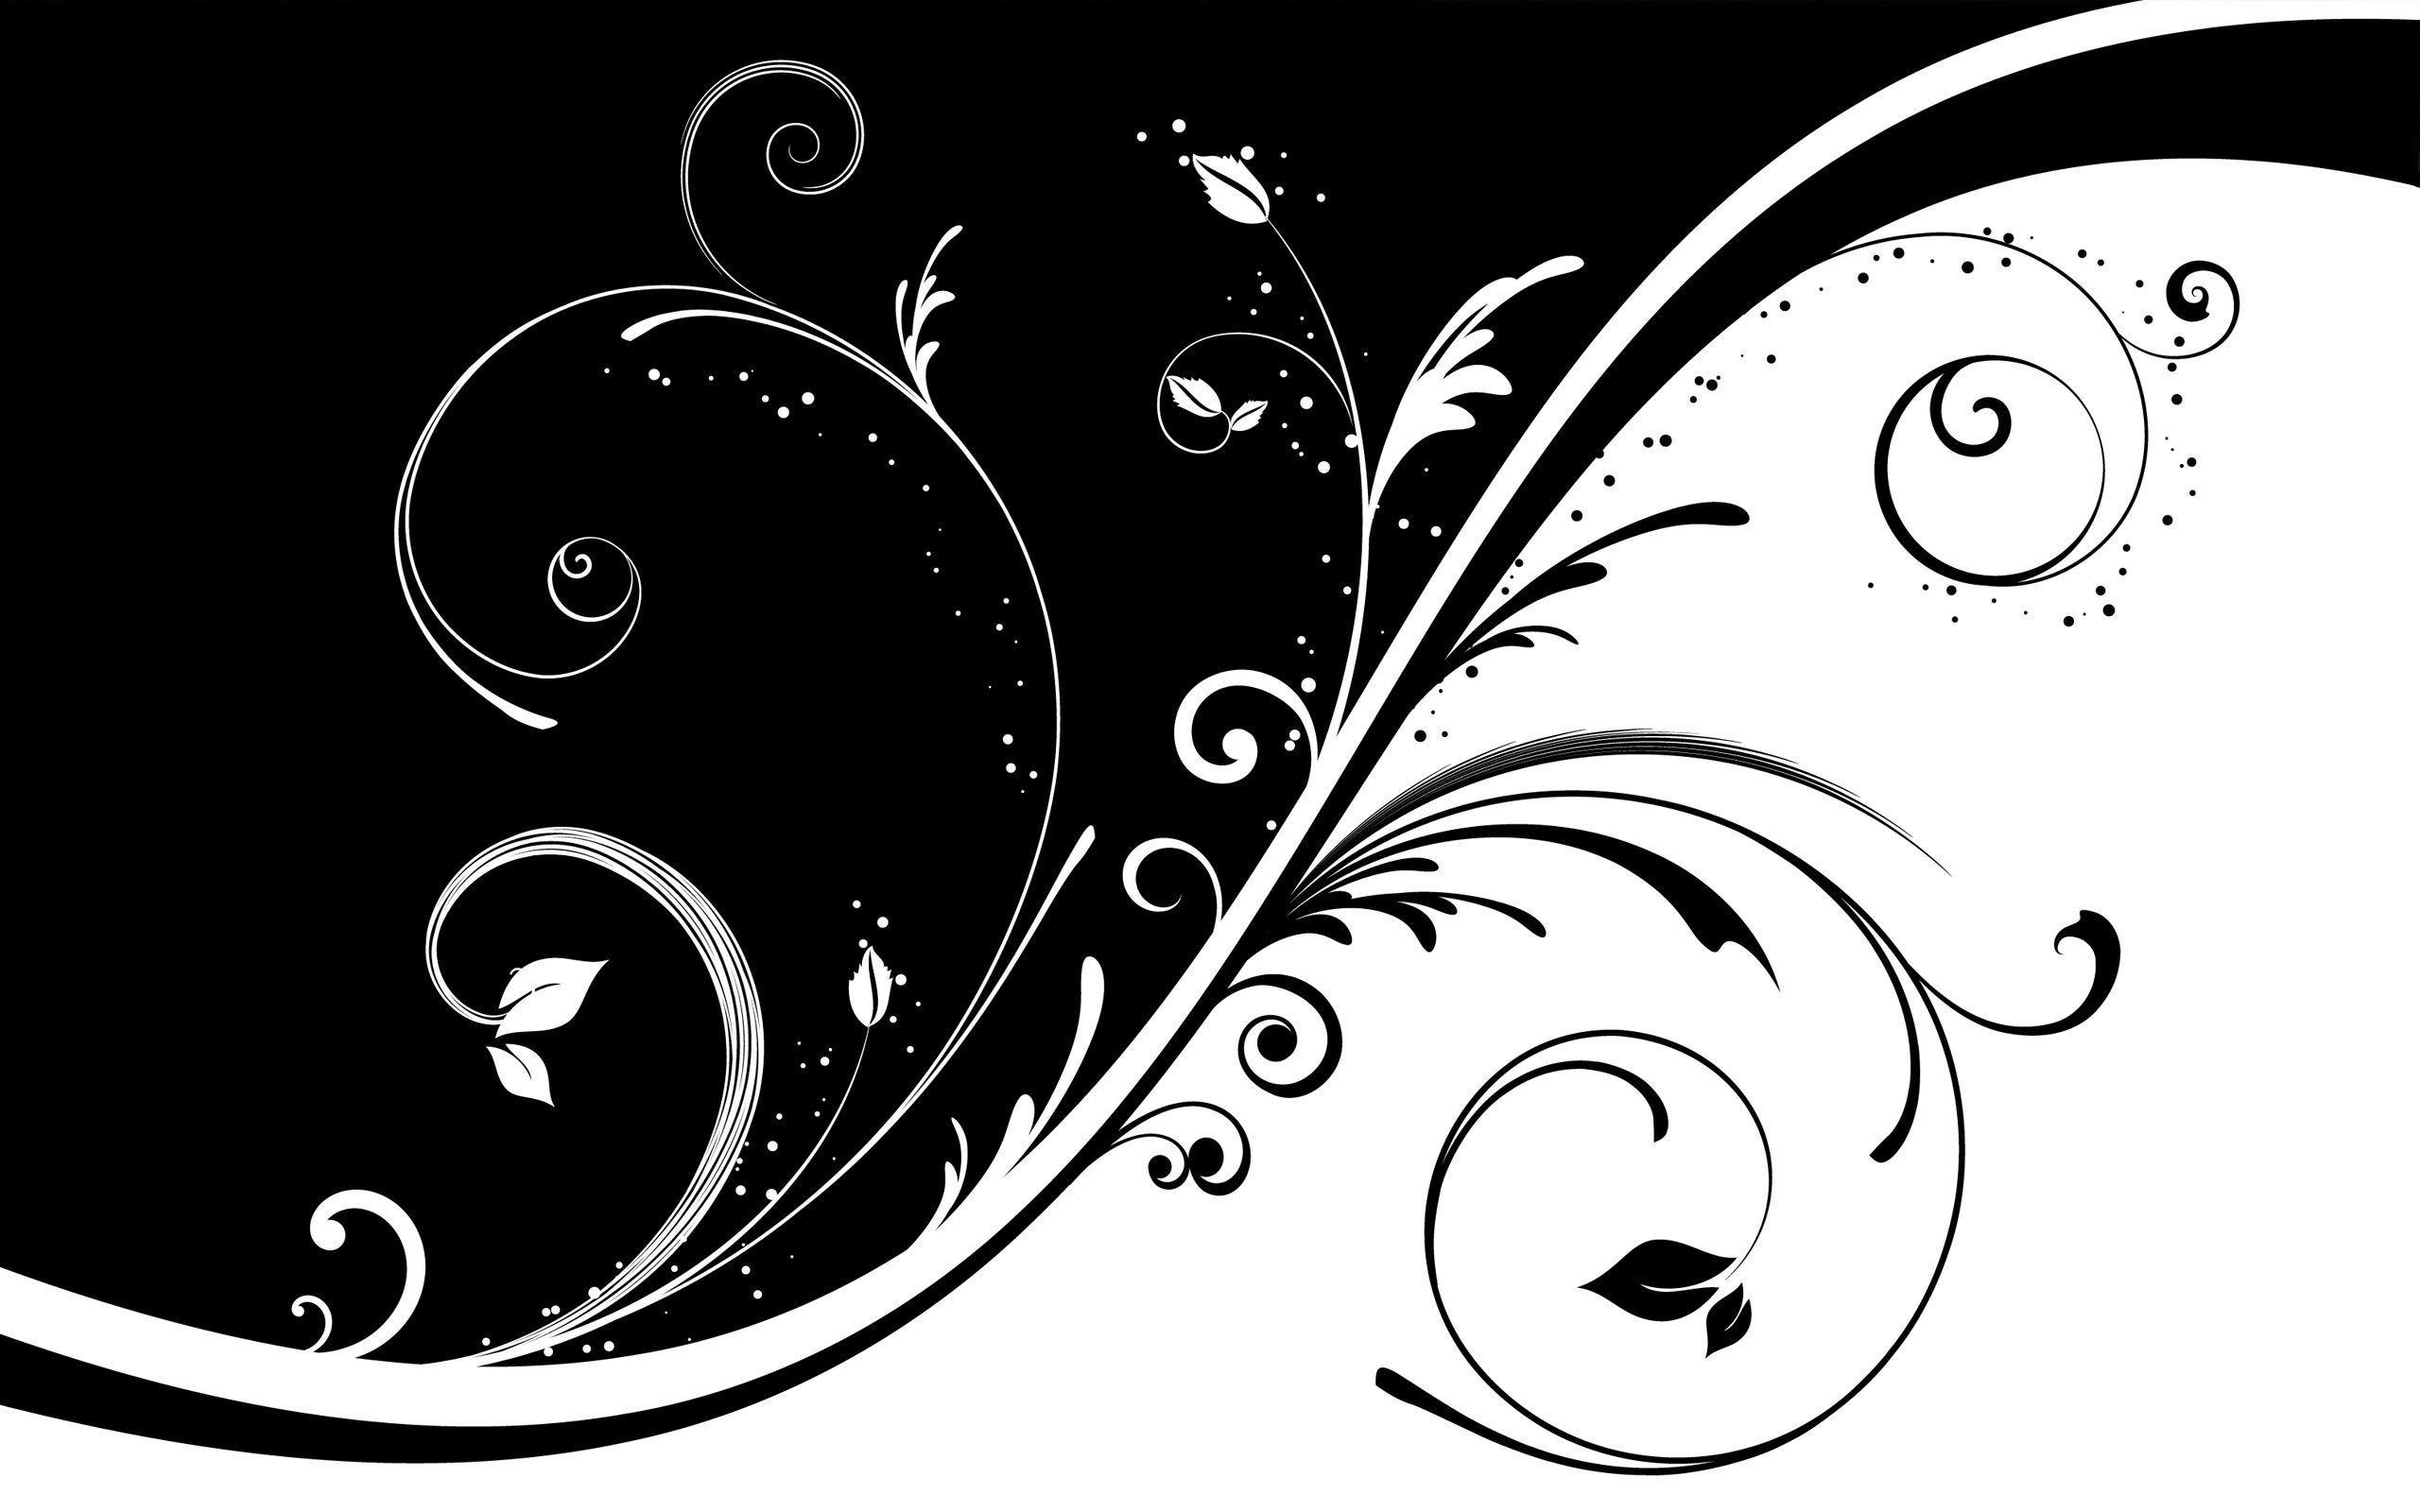 Black and White Vector Art Wallpapers - Top Free Black and White Vector